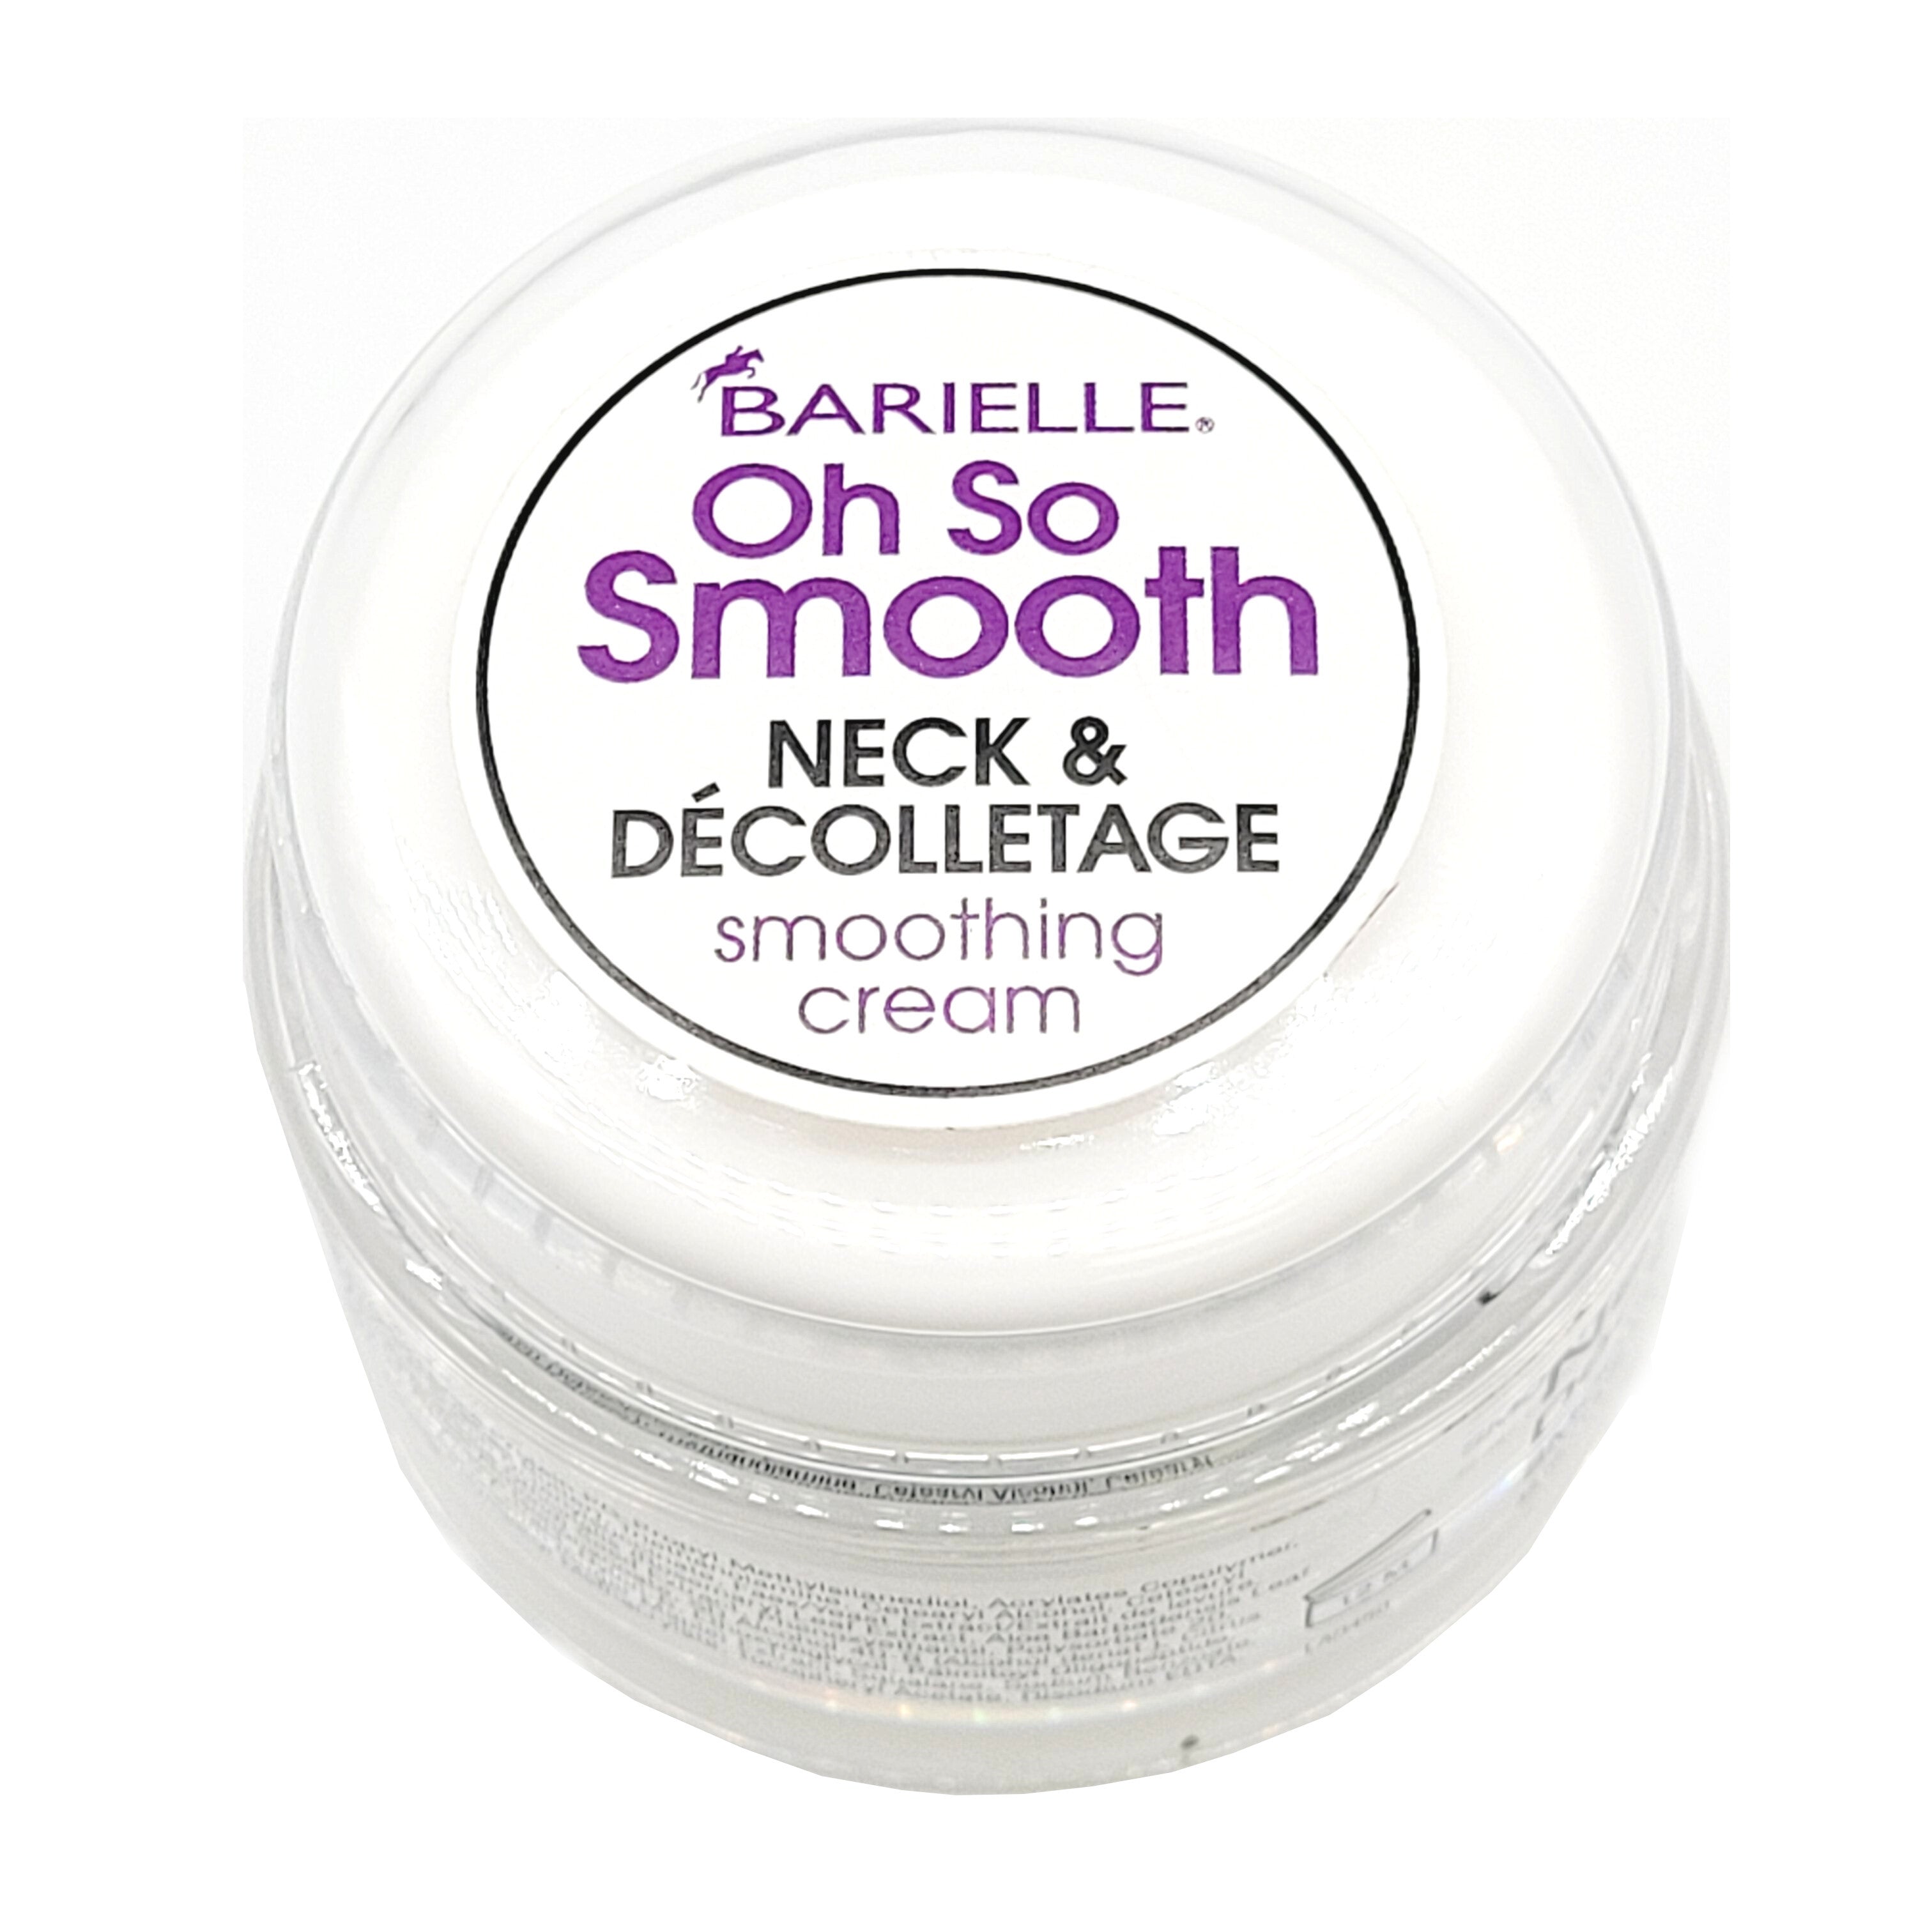 Barielle Oh So Smooth Neck and Decolletage Smoothing Cream 1.5 oz.